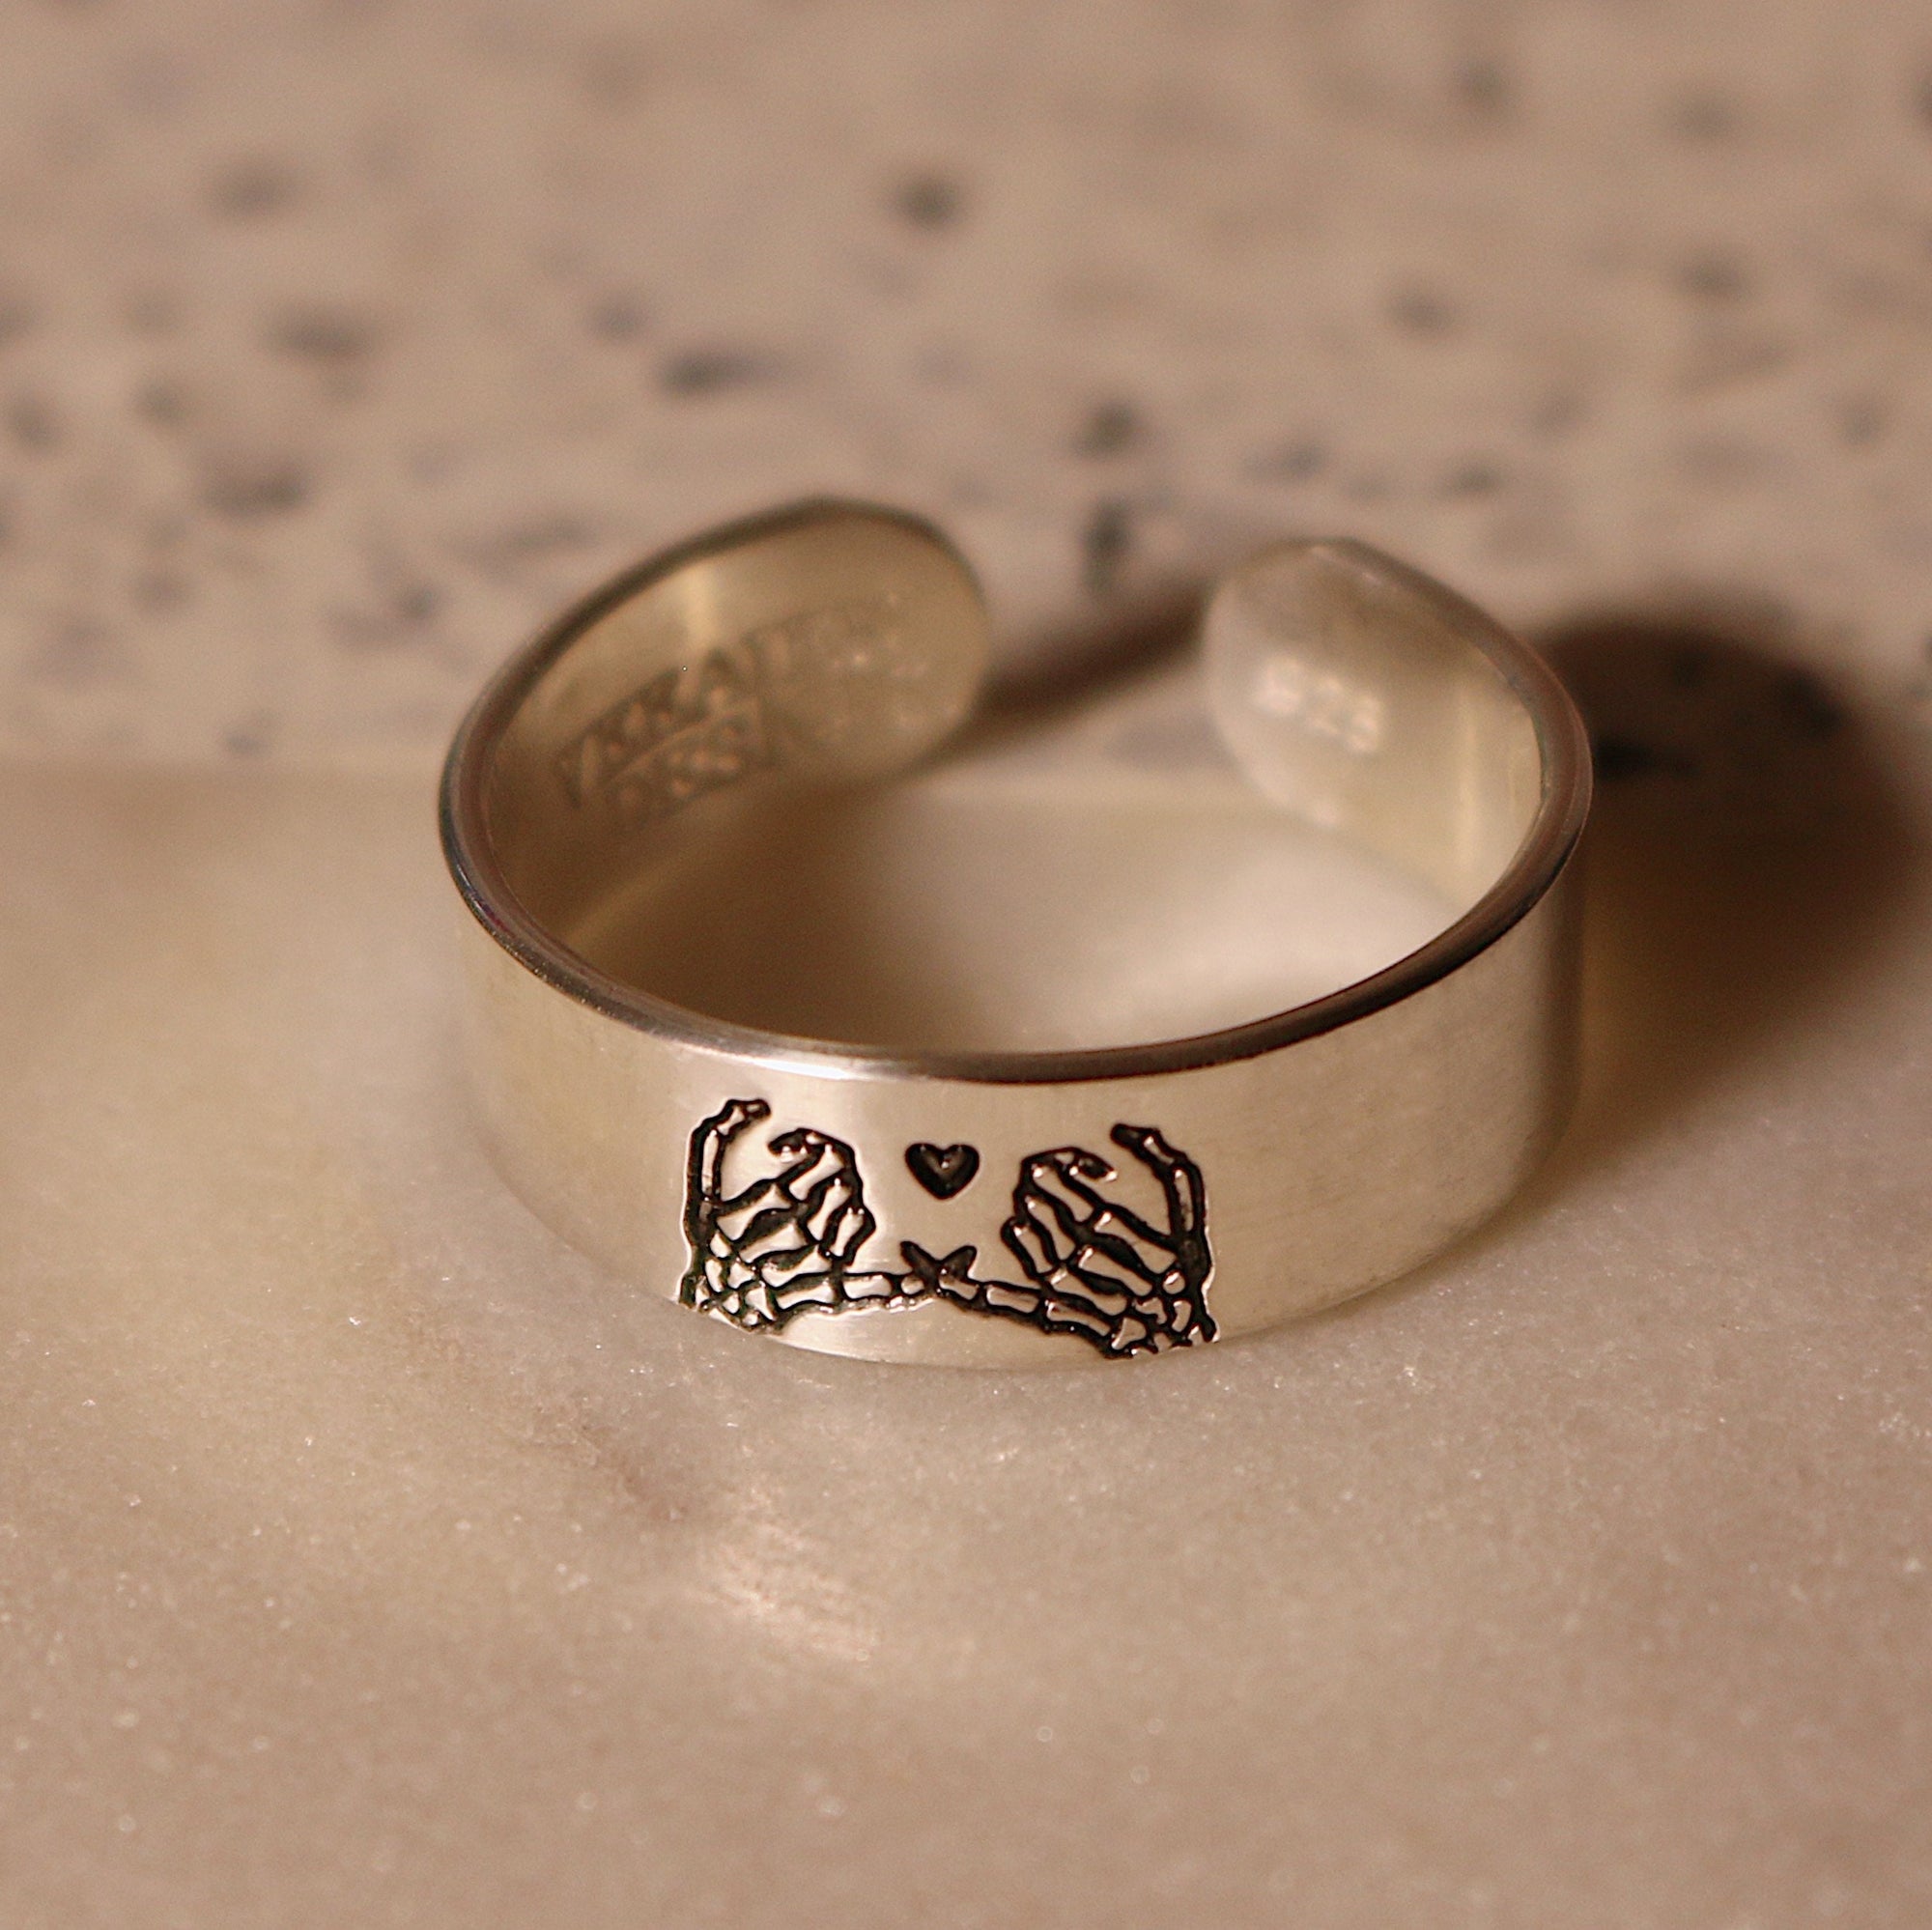 Double Skeleton Pinky Swear Heart Ring | Best Friend Birthday Gift | Promise Ring for Couples | Goth Friendship Ring | Everyday Jewelry